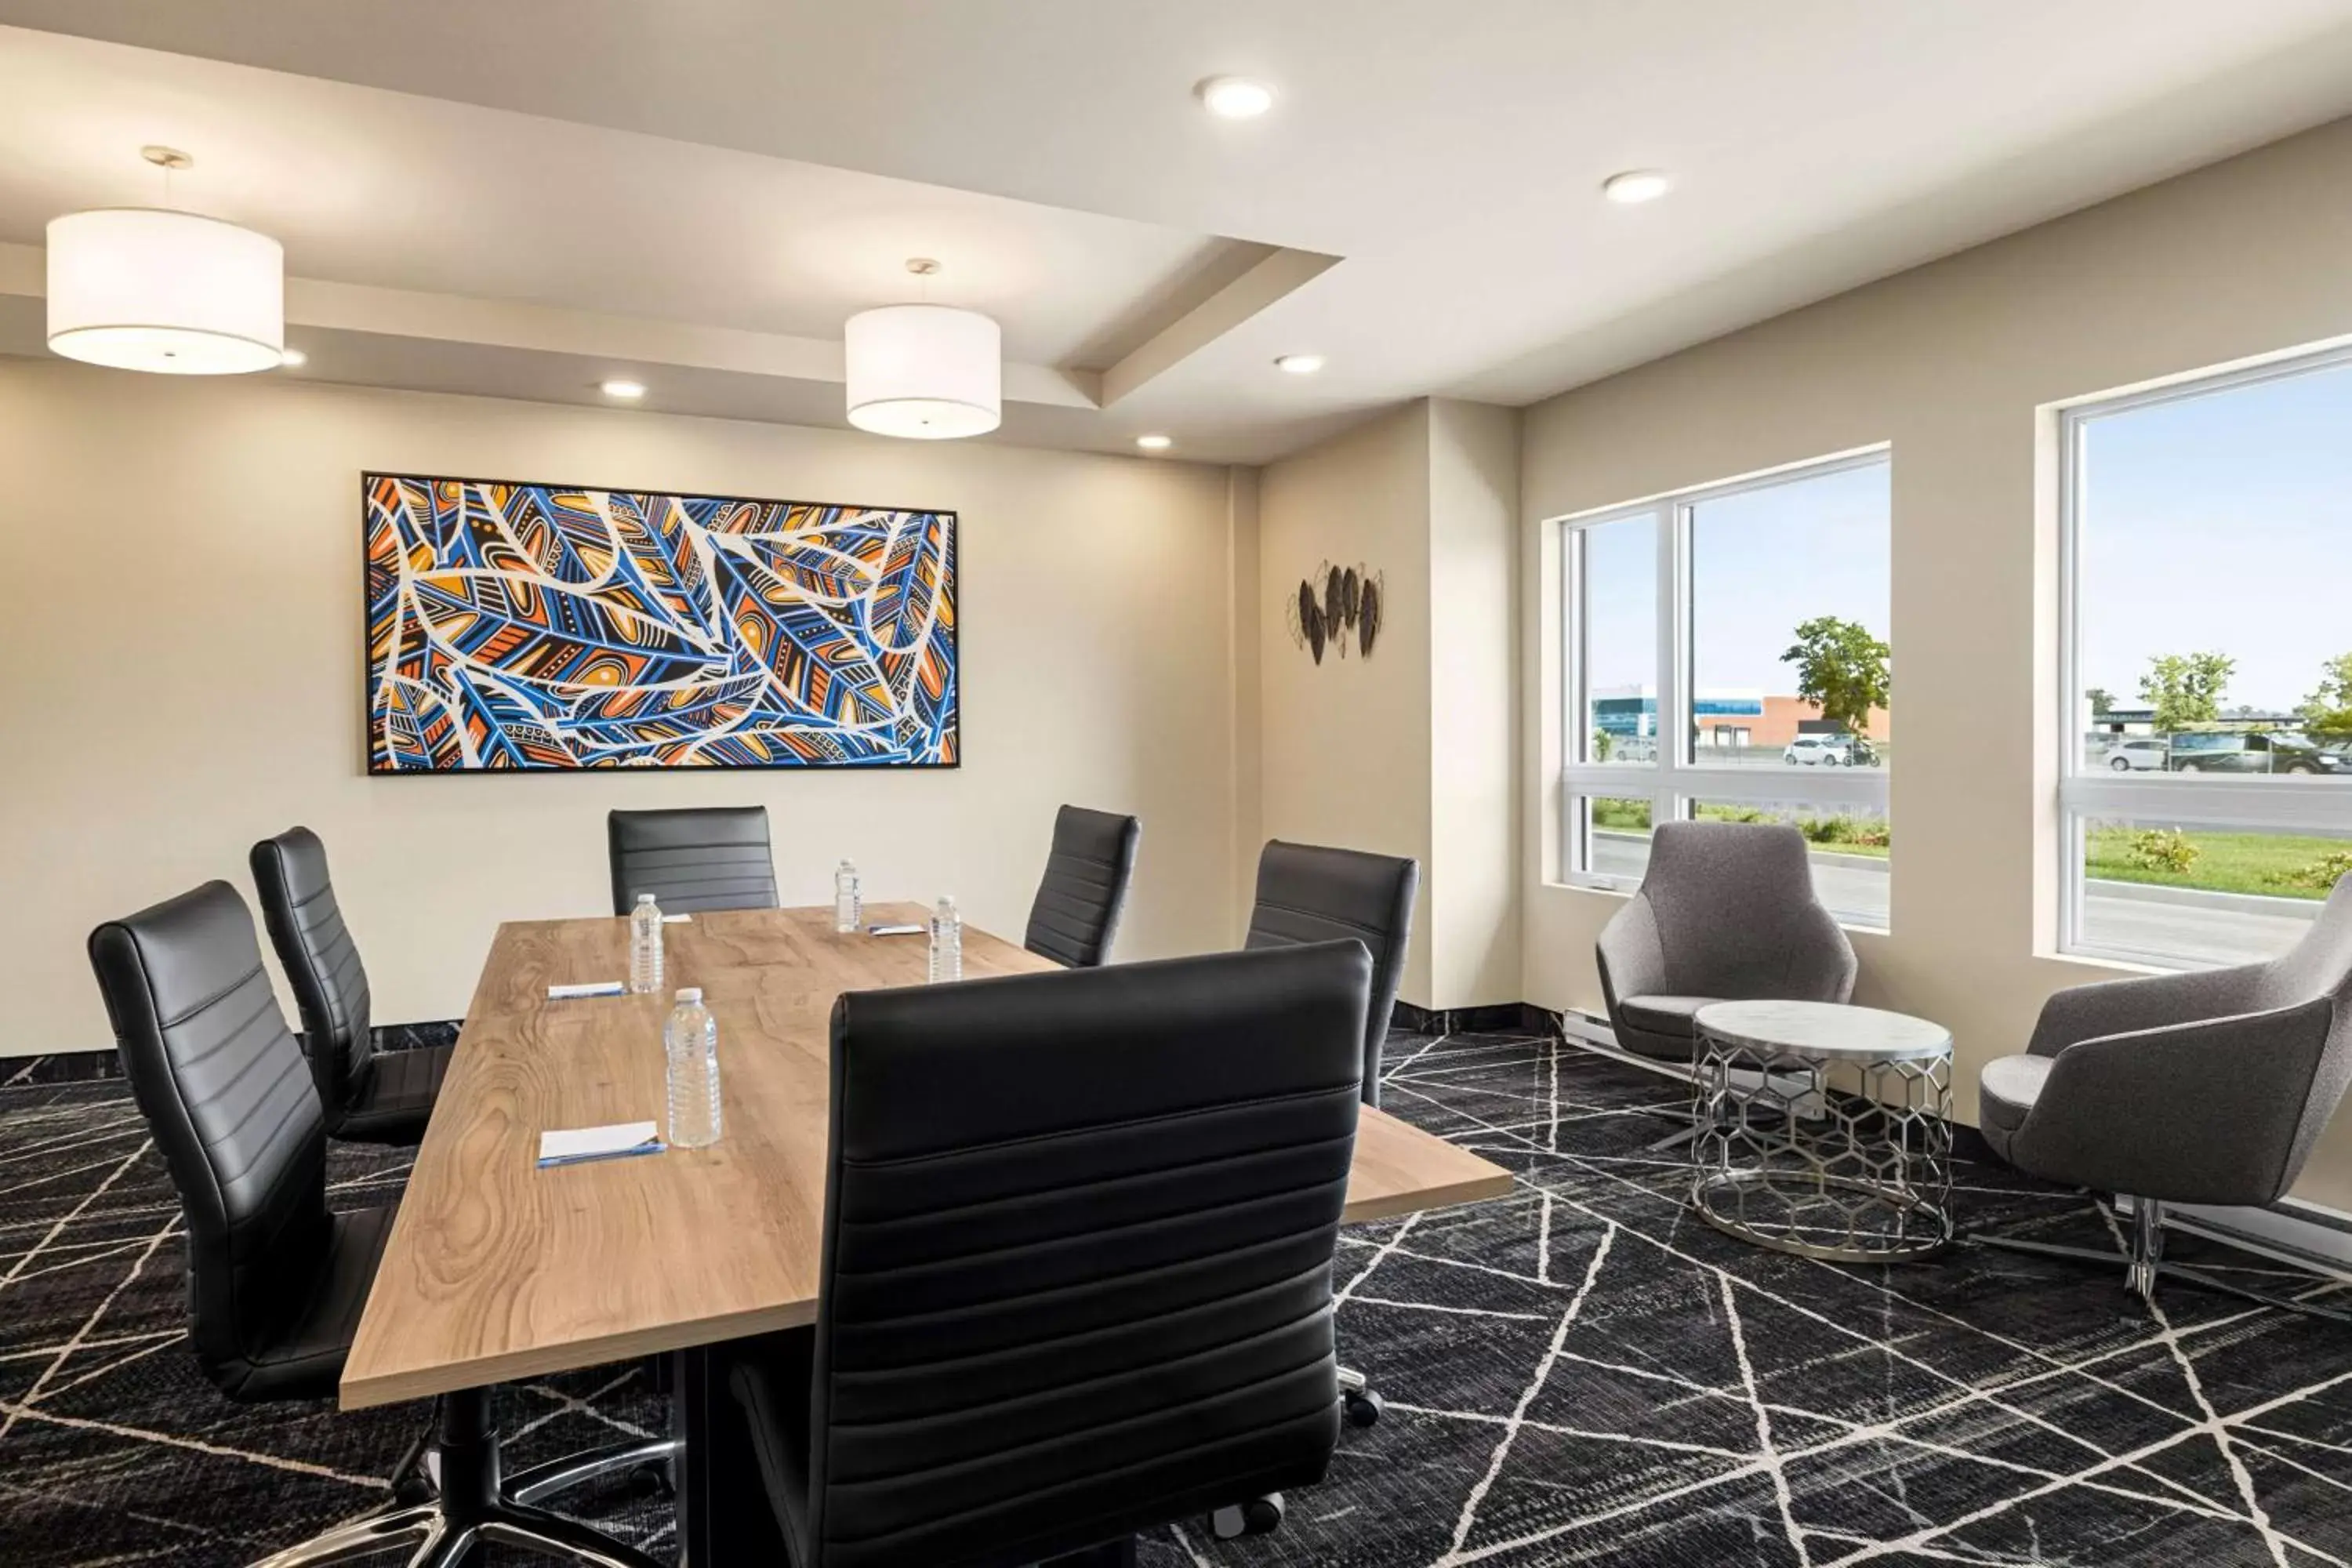 Meeting/conference room in Microtel Inn & Suites Montreal Airport-Dorval QC